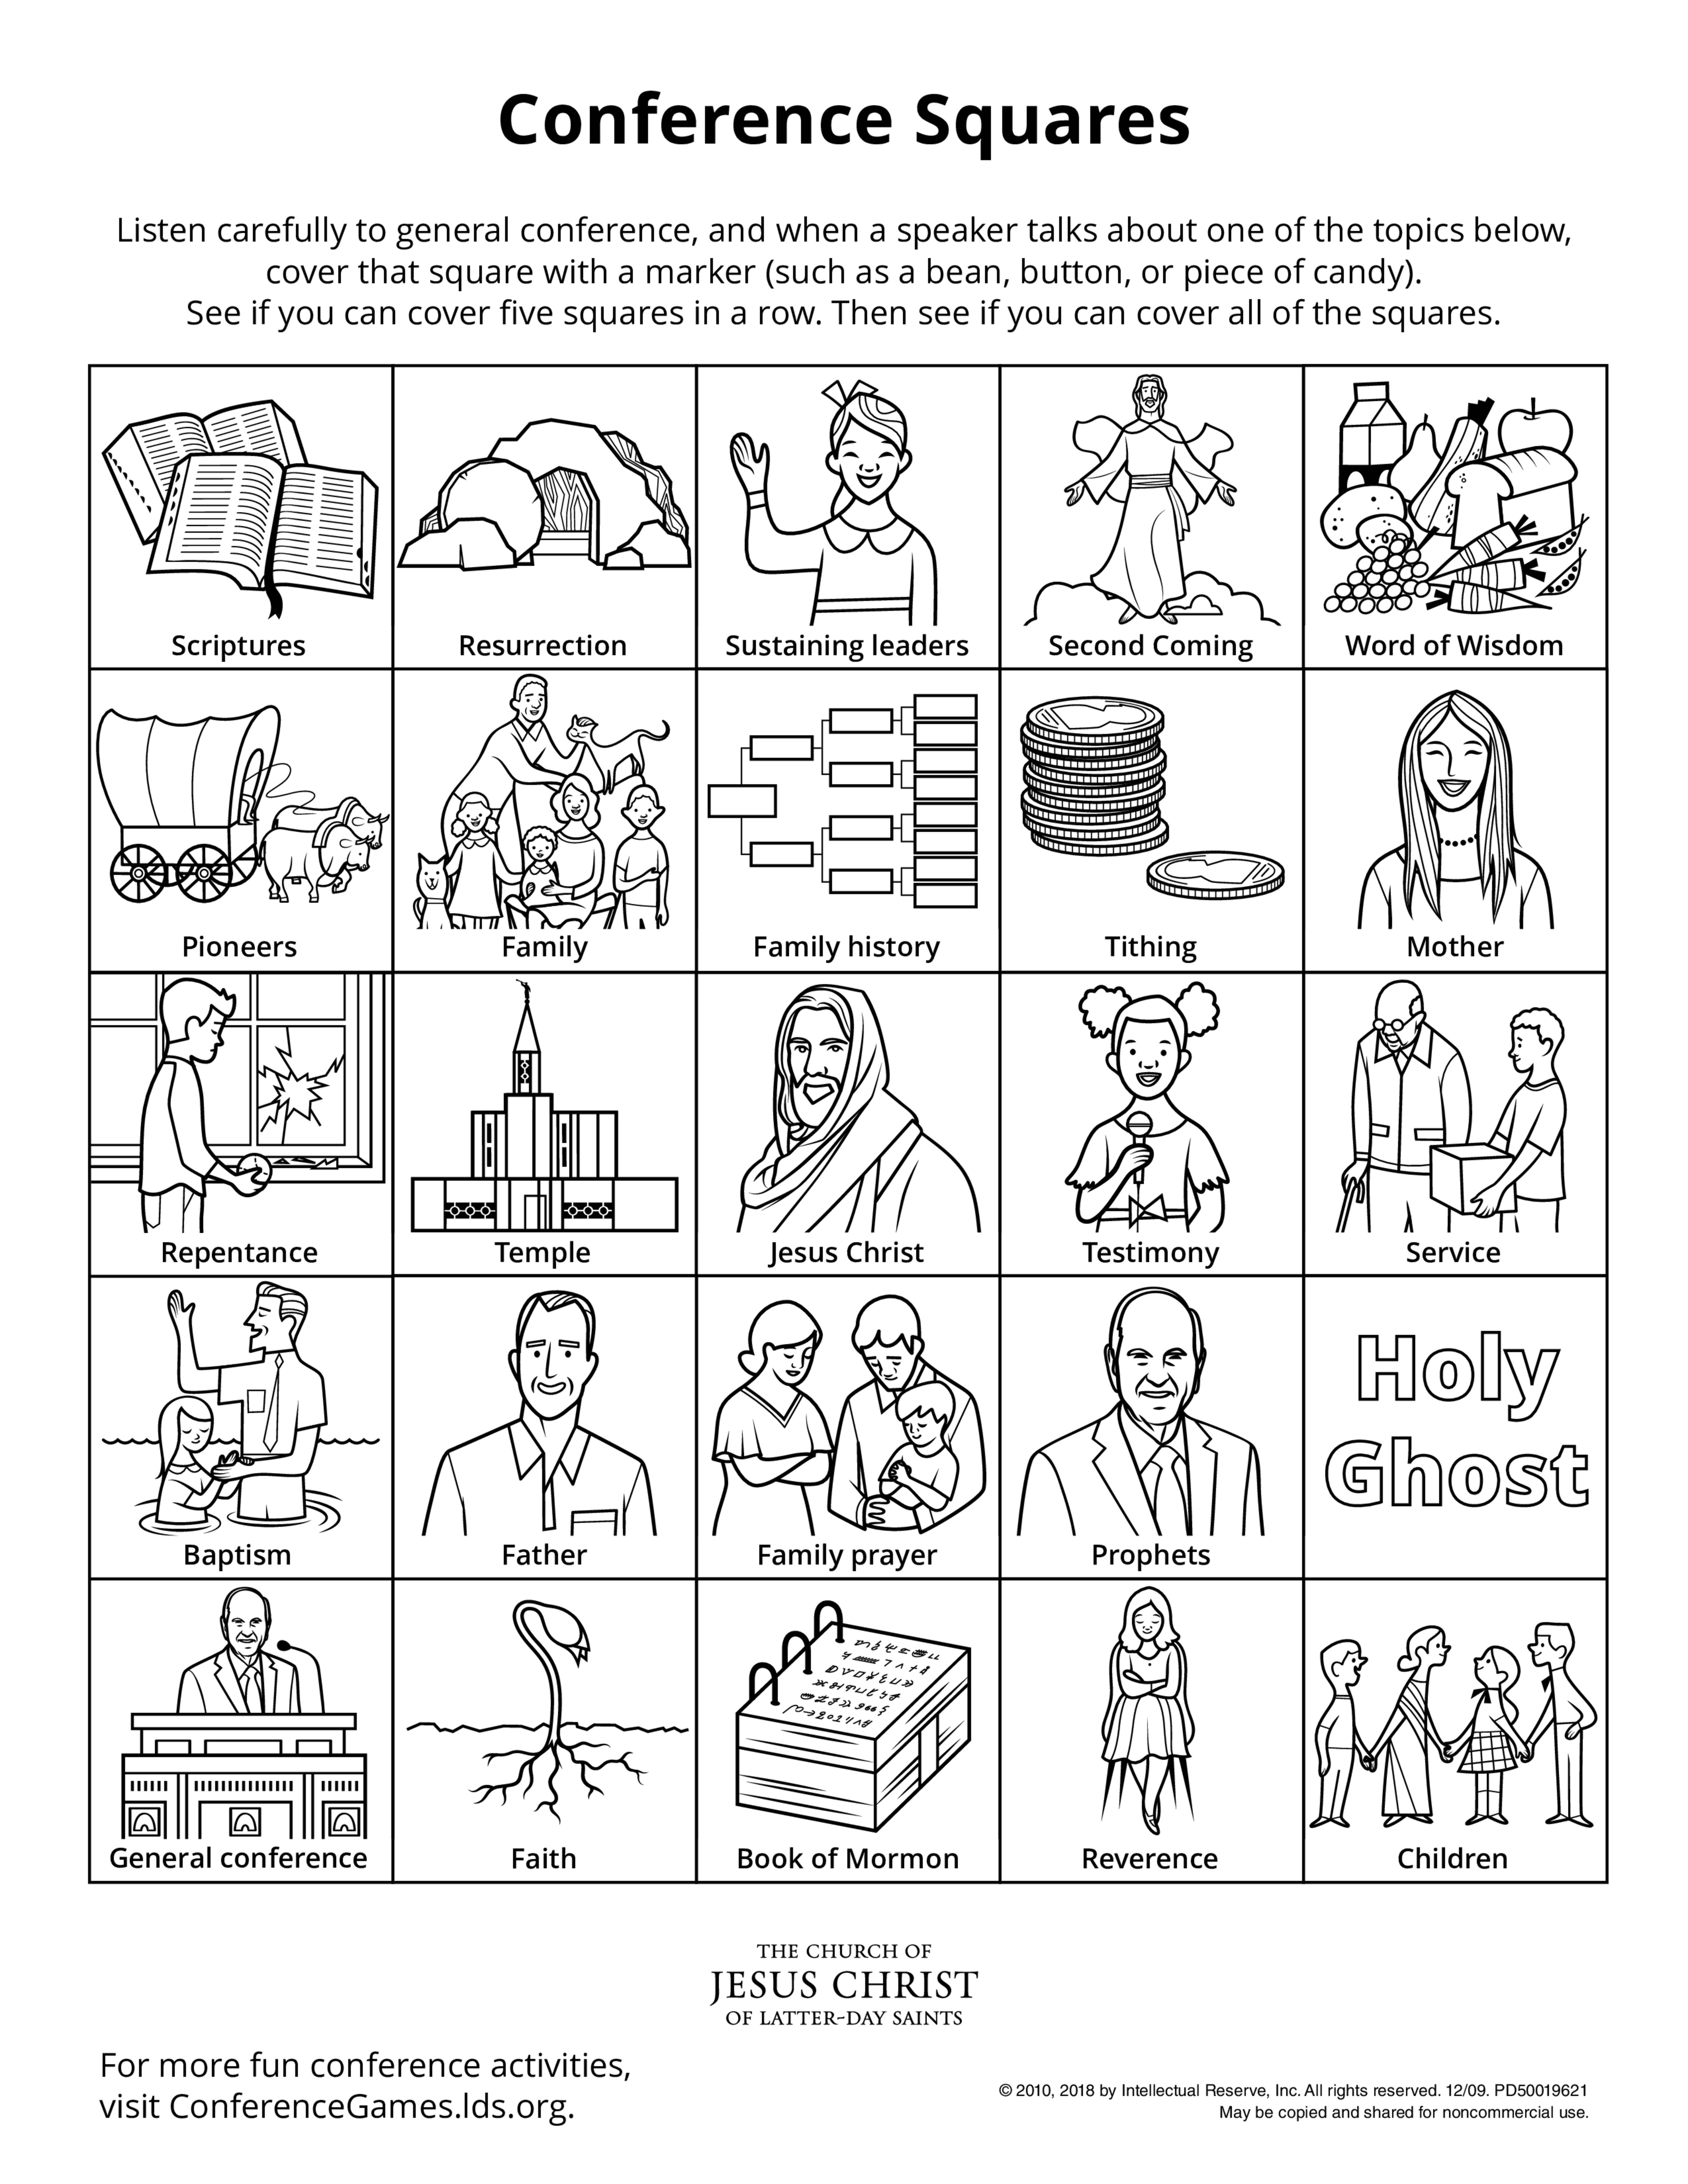 An activity page to encourage children to listen and engage while watching general conference.